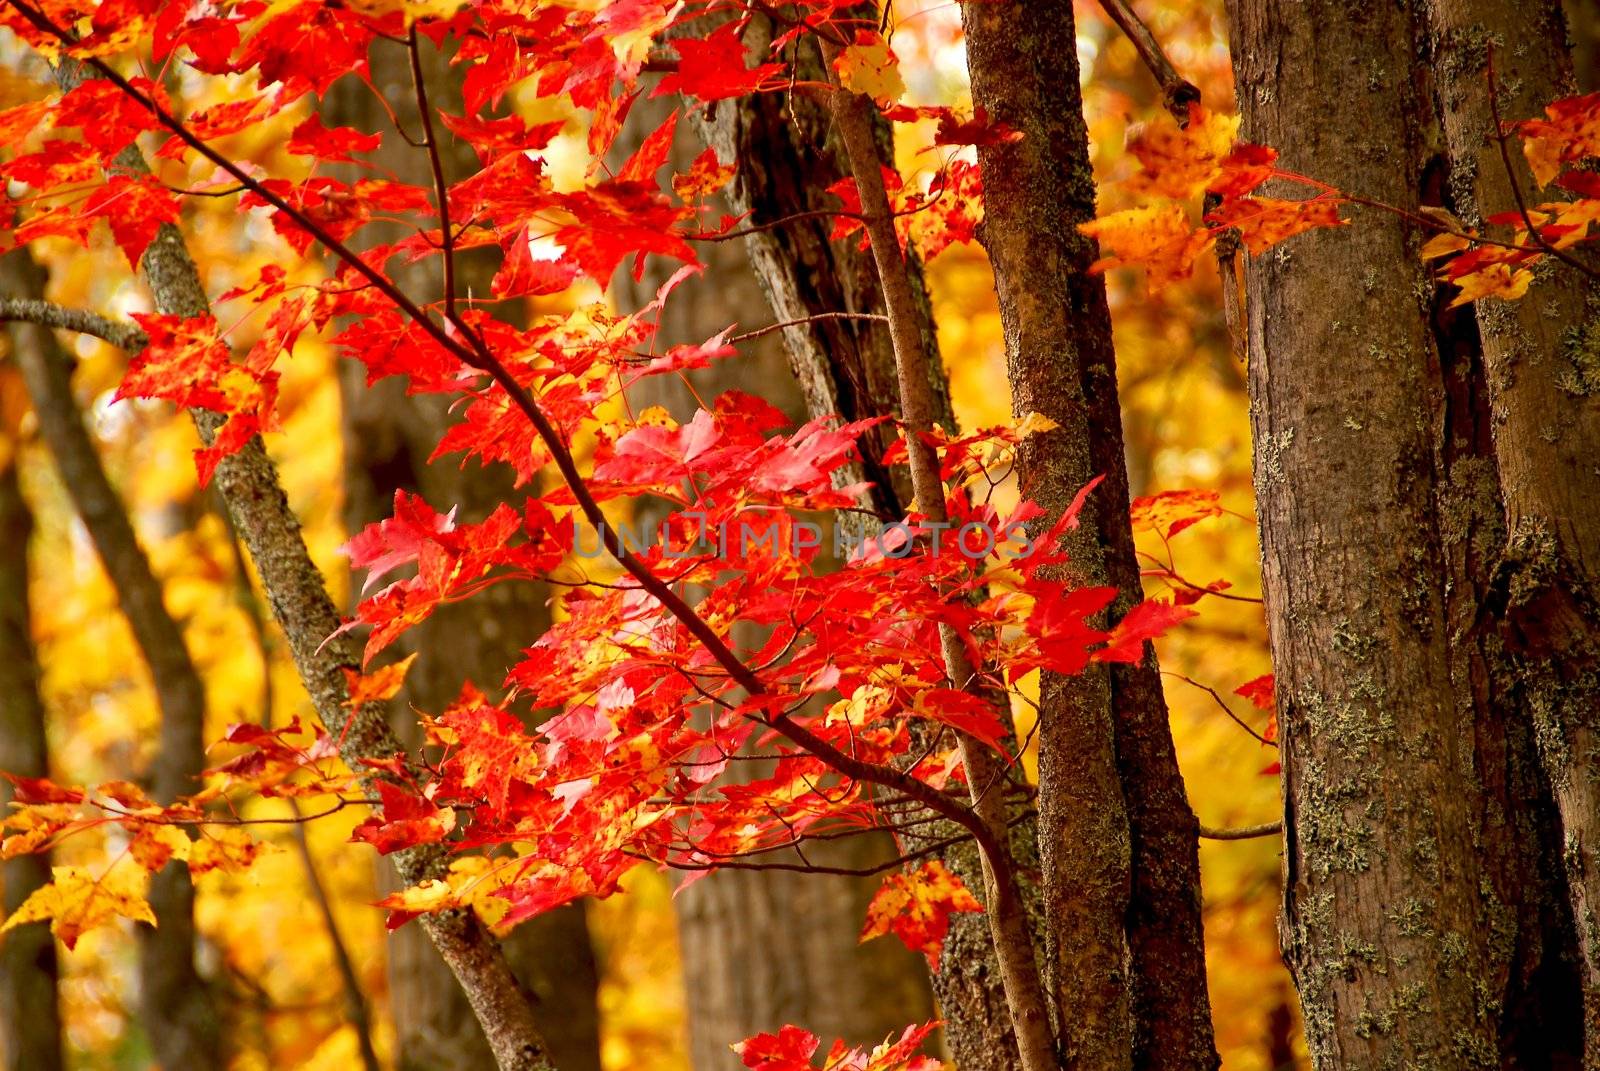 Colorful fall forest background with red maples leaves